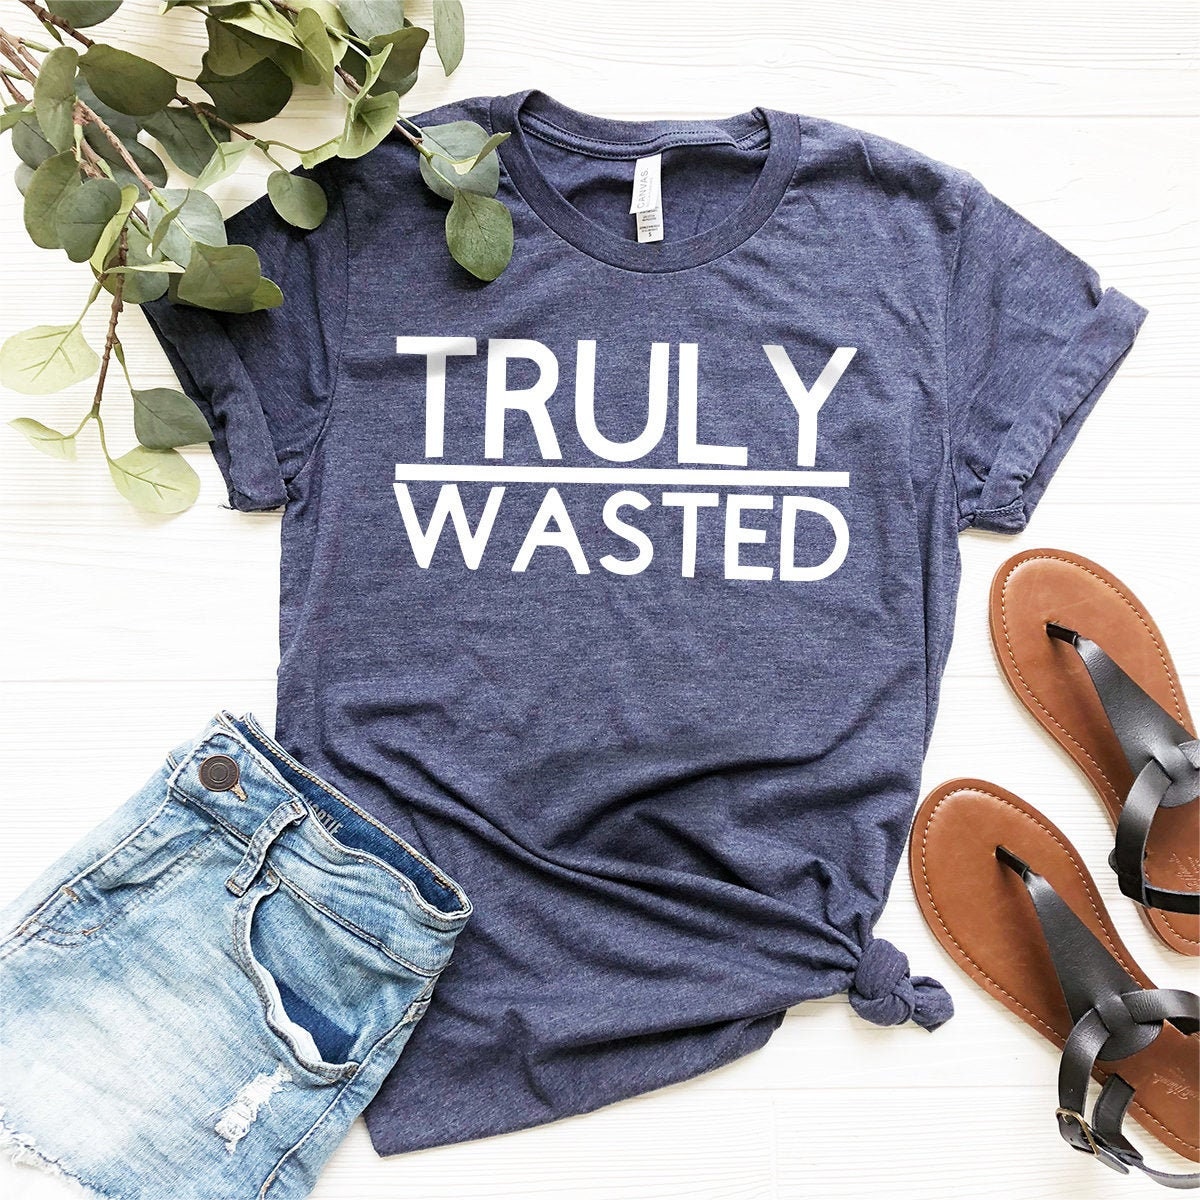 Truly Wasted T-Shirt, Alcoholic Shirt, Drink Alcohol Shirt, Drunk Shirt, Funny Alcohol Shirt, Gift For Alcohol, Drinking Shirt, Drunk Tee - Fastdeliverytees.com